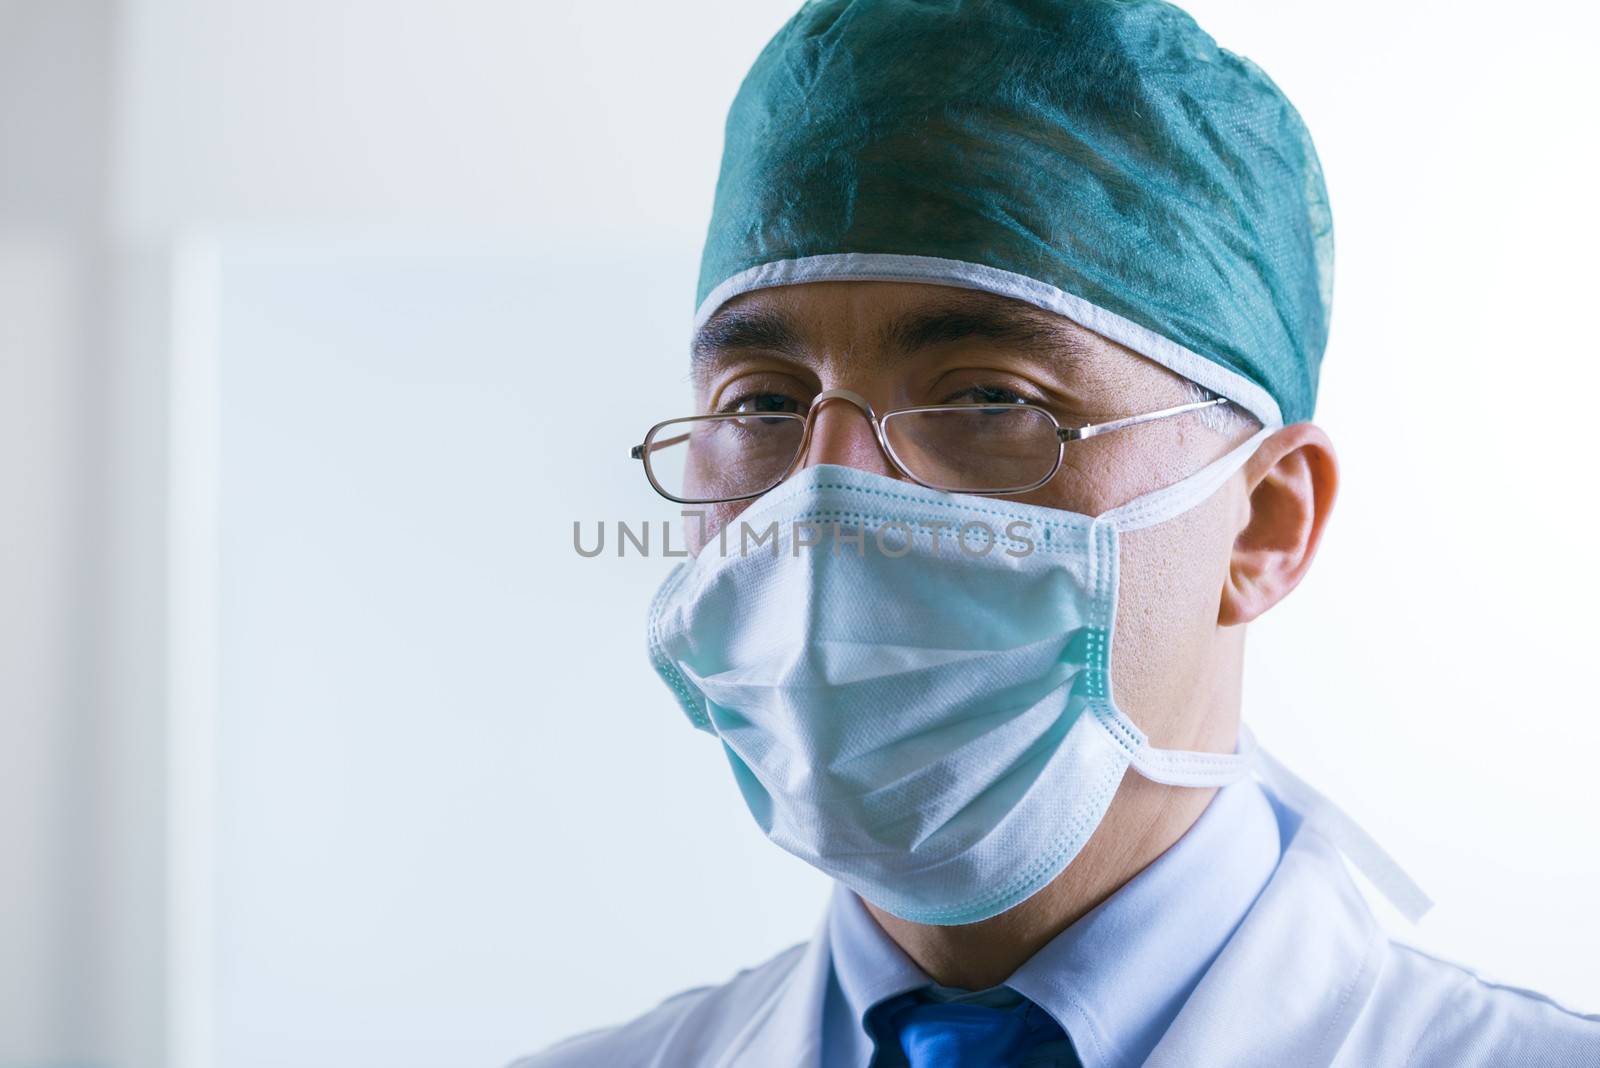 Senior professional surgeon with surgical mask and cap.